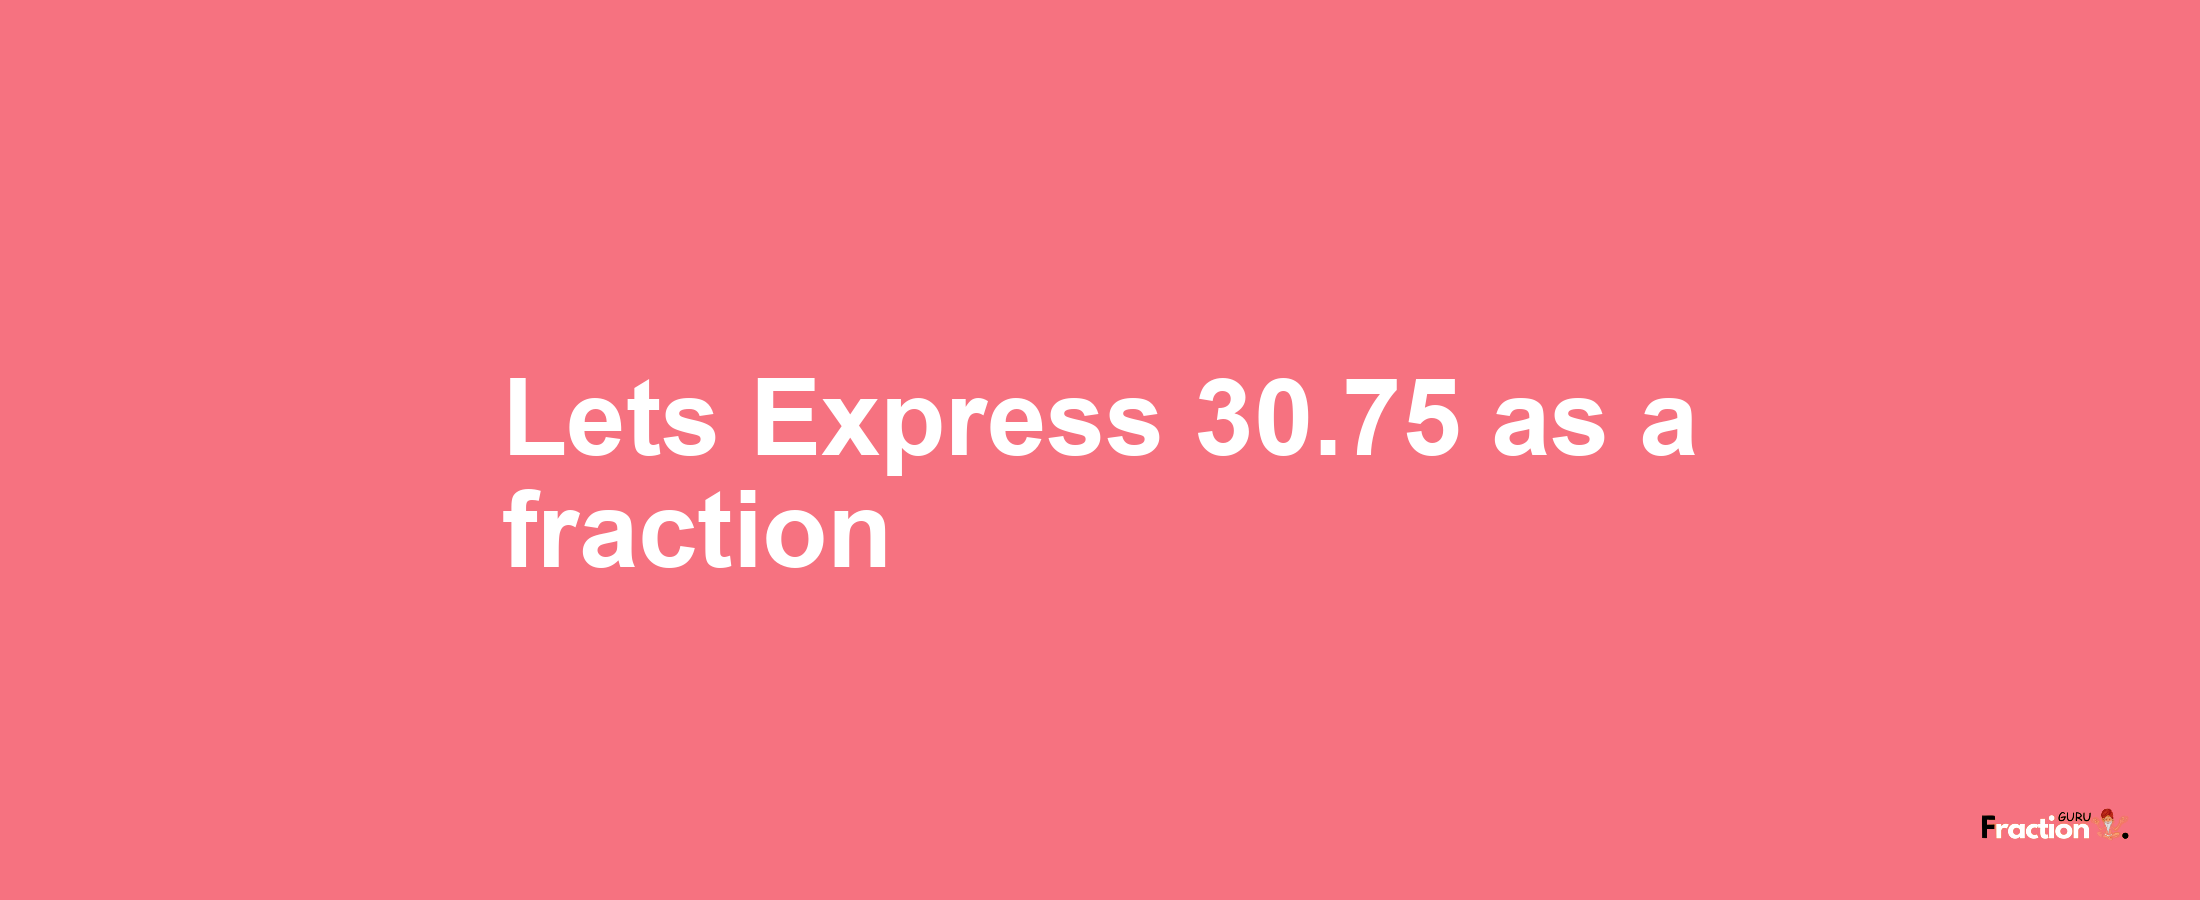 Lets Express 30.75 as afraction